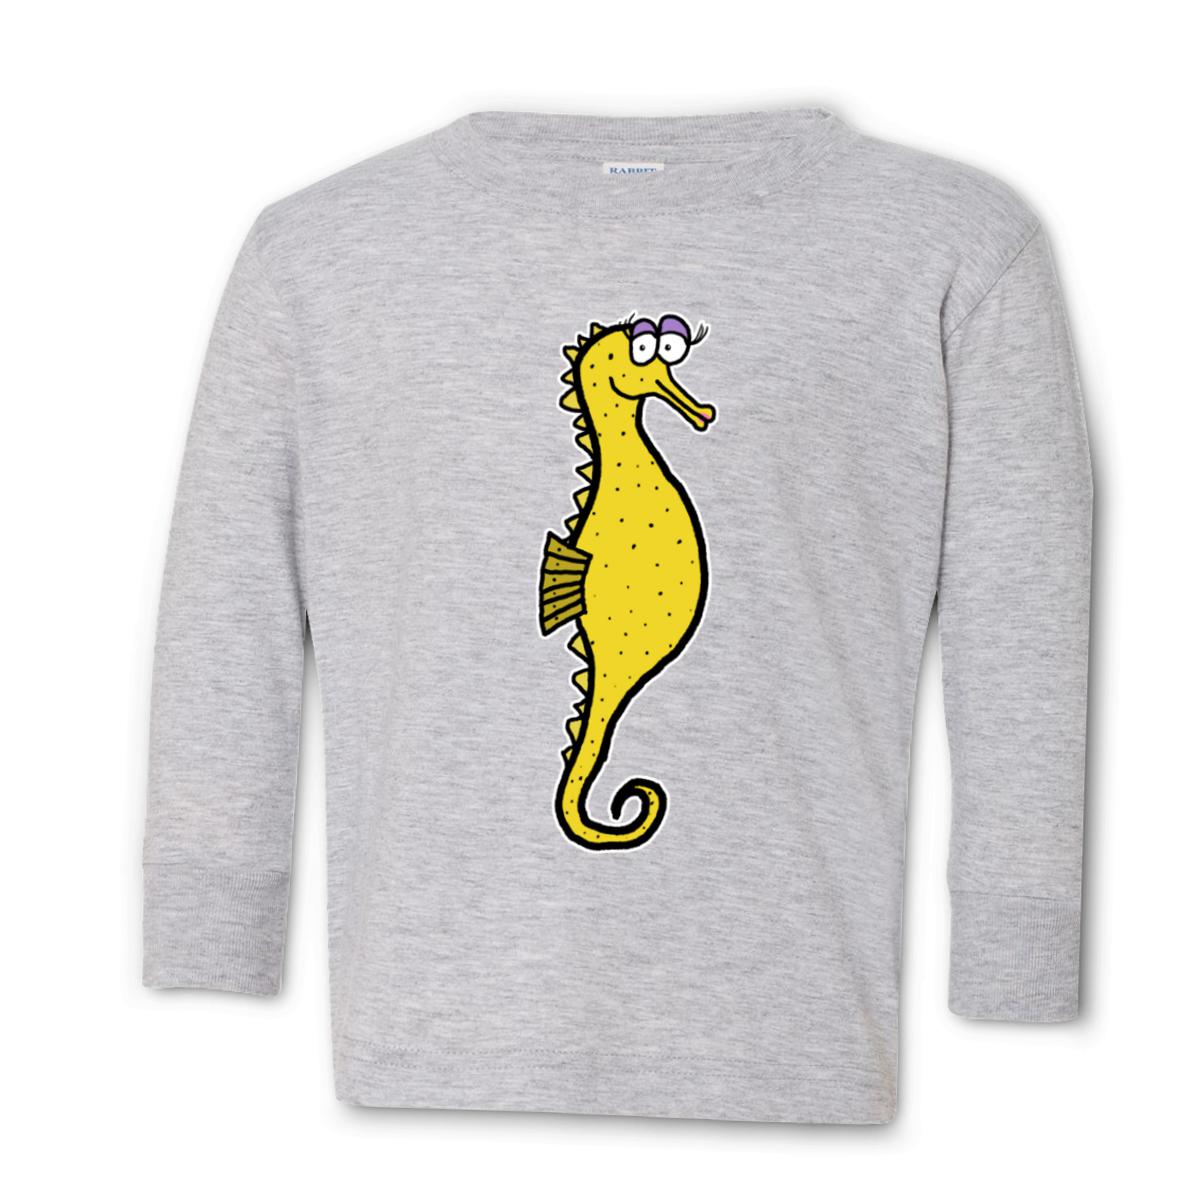 Seahorse Toddler Long Sleeve Tee 2T heather